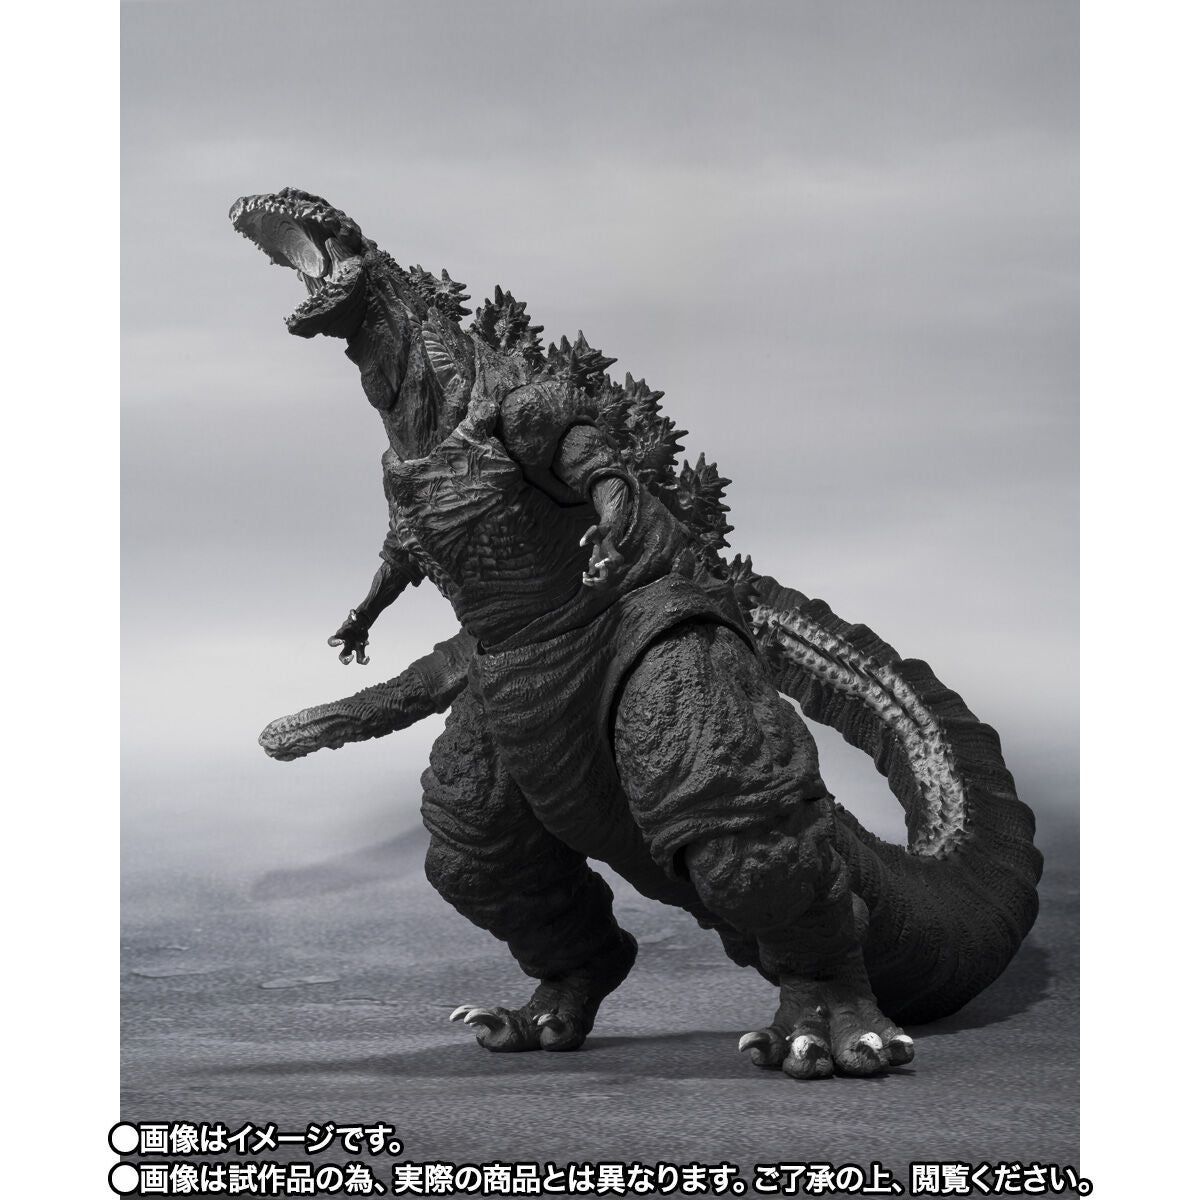 From 2016's Shin #Godzilla ORTHO comes a monochrome version of SH MonsterArts Godzilla in his 4th form! Preorders available now 👉 buff.ly/44EdiZ9